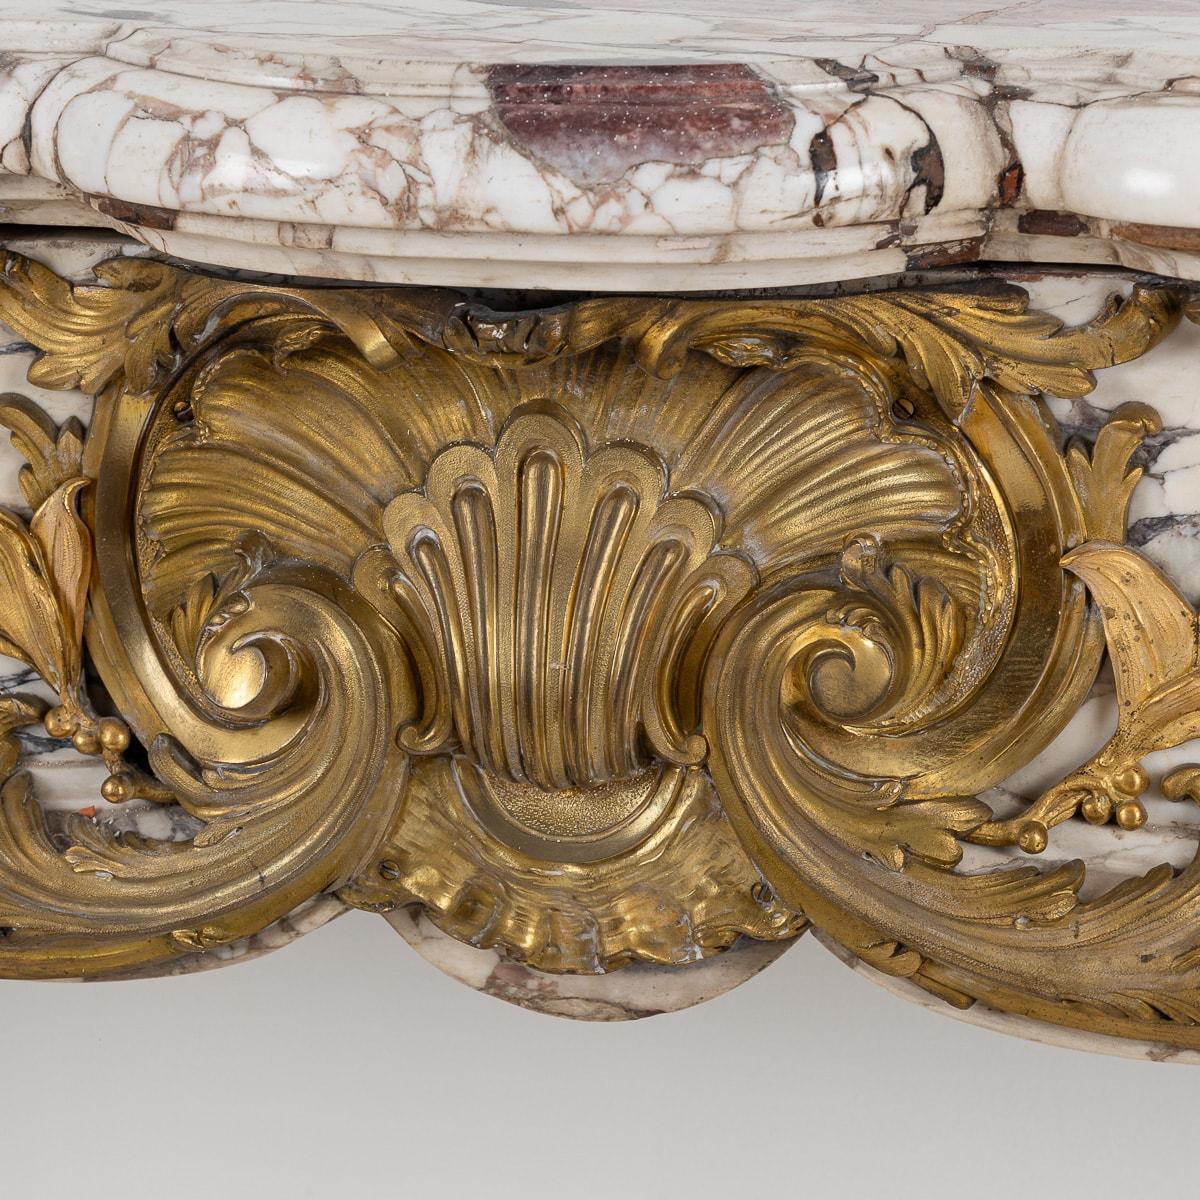 19th Century French Ormolu Mounted Breche Violette Marble Fireplace c.1870 For Sale 5